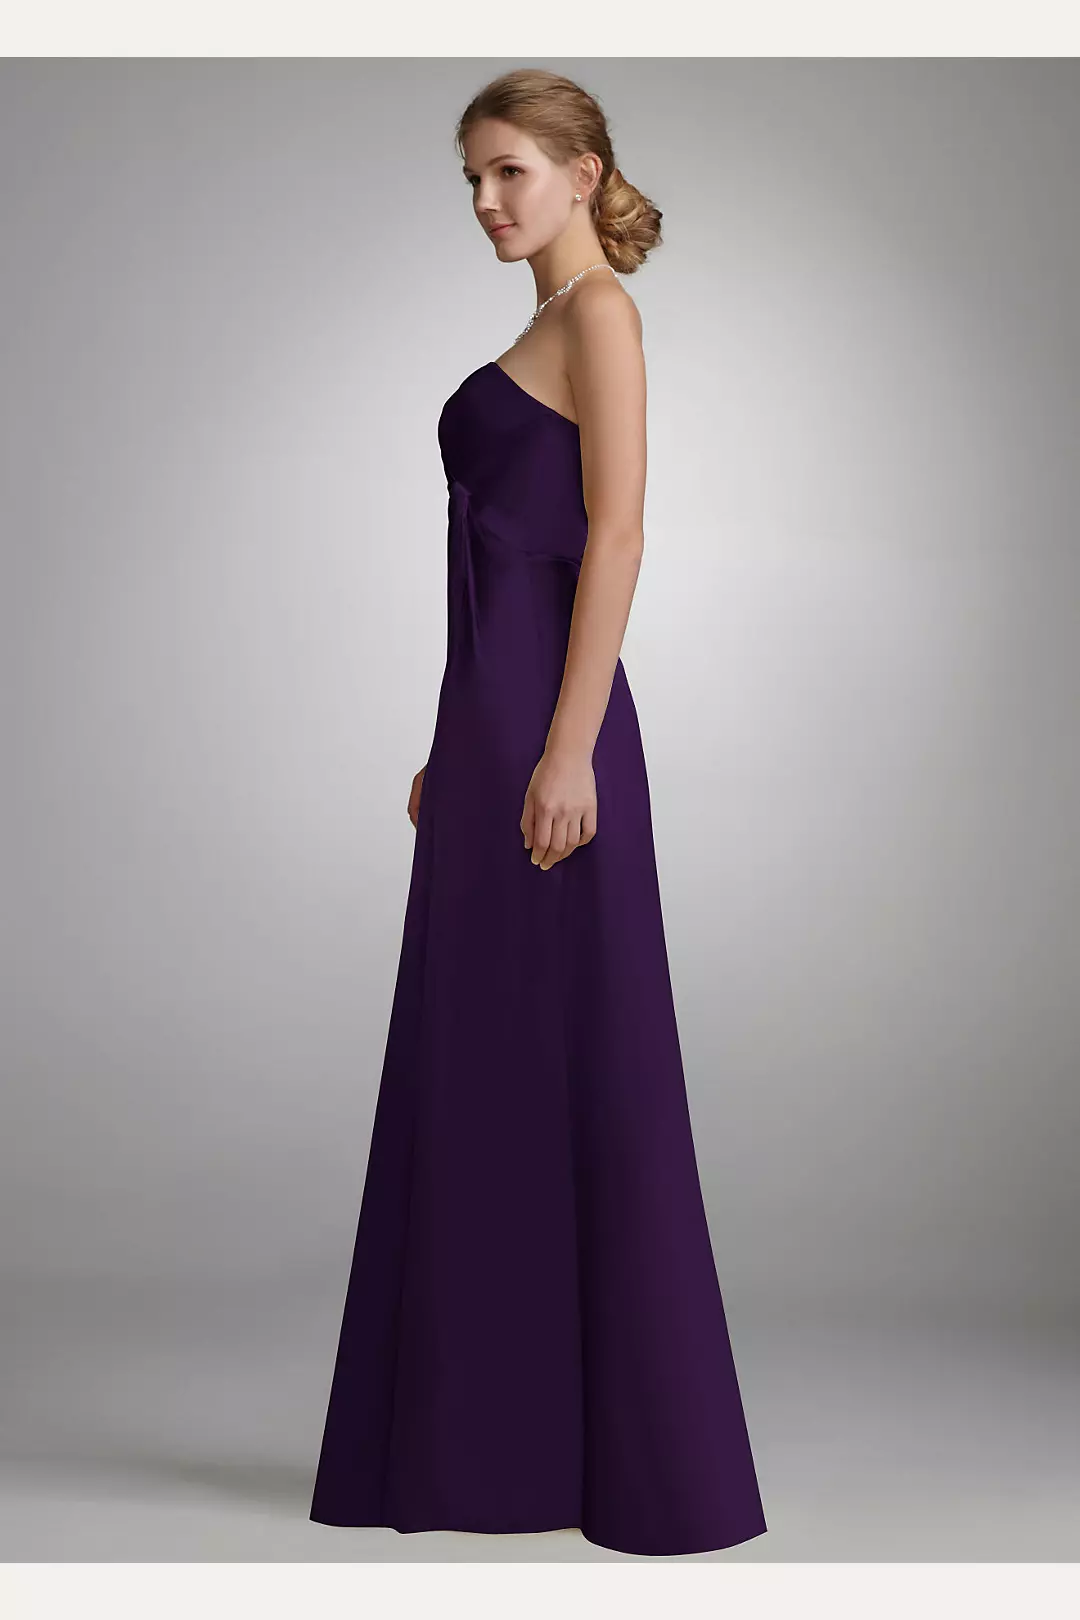 Strapless Long Charmeuse Dress with Slit Image 3